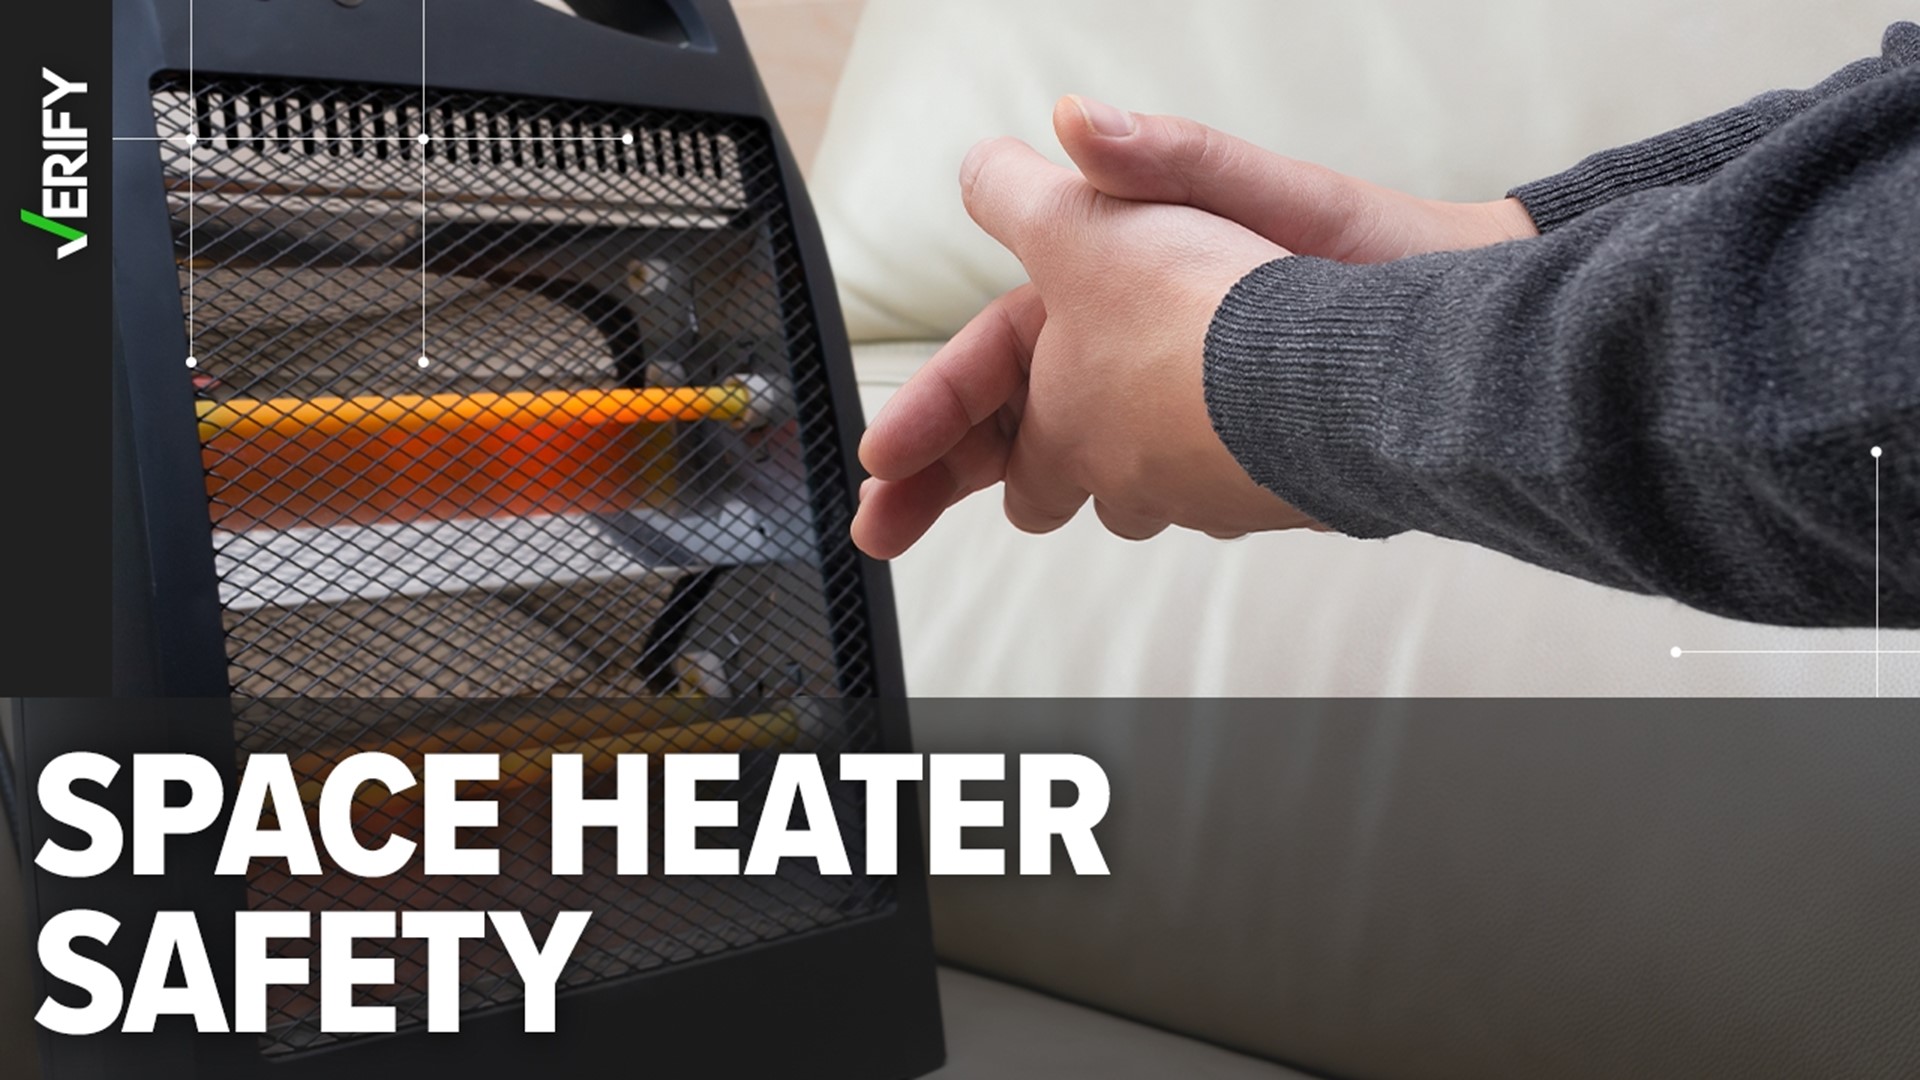 Space heater safety tips: How to prevent a fire in your home | wcnc.com